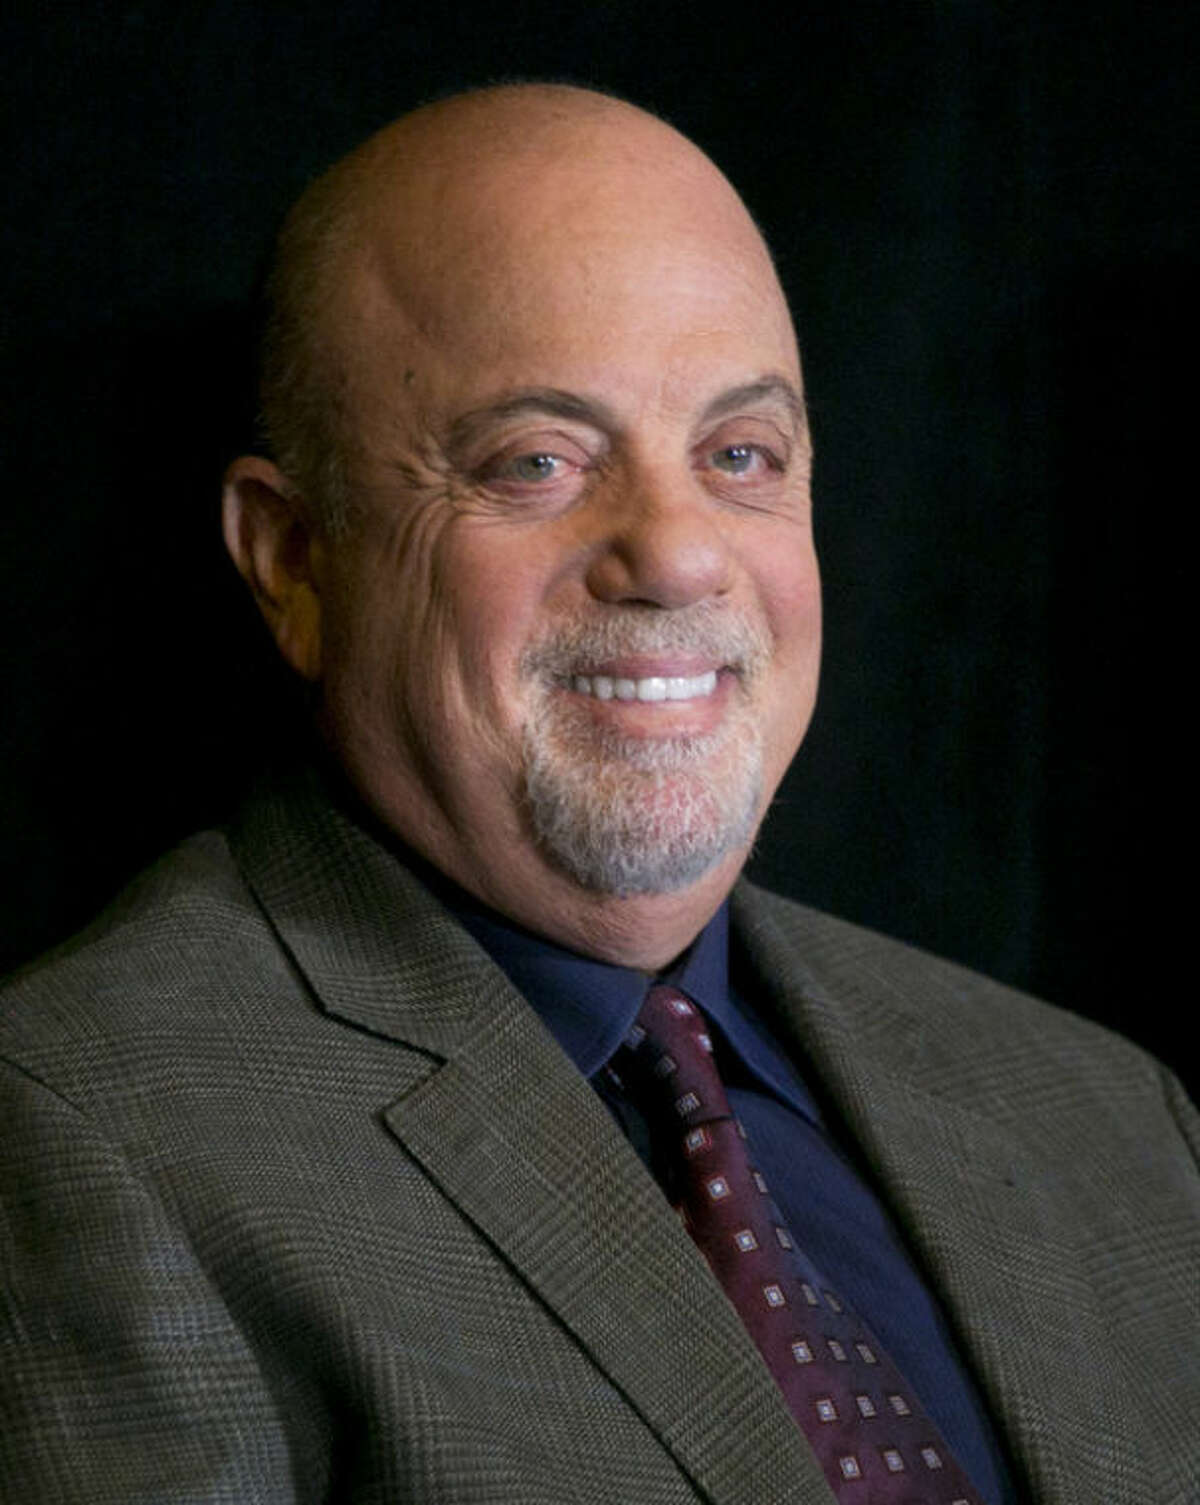 Billy Joel smiles at a news conference at Madison Square Garden, Tuesday, Dec. 3, 2013 in New York. The icon announced he will perform a residency at the famed NYC venue once a month for as many months as New Yorkers demand. He is set to perform sold out shows on Jan. 27, Feb. 3, March 21 and April 28. He will also perform on his 65th birthday, which is May 9. (AP Photo/Mark Lennihan)